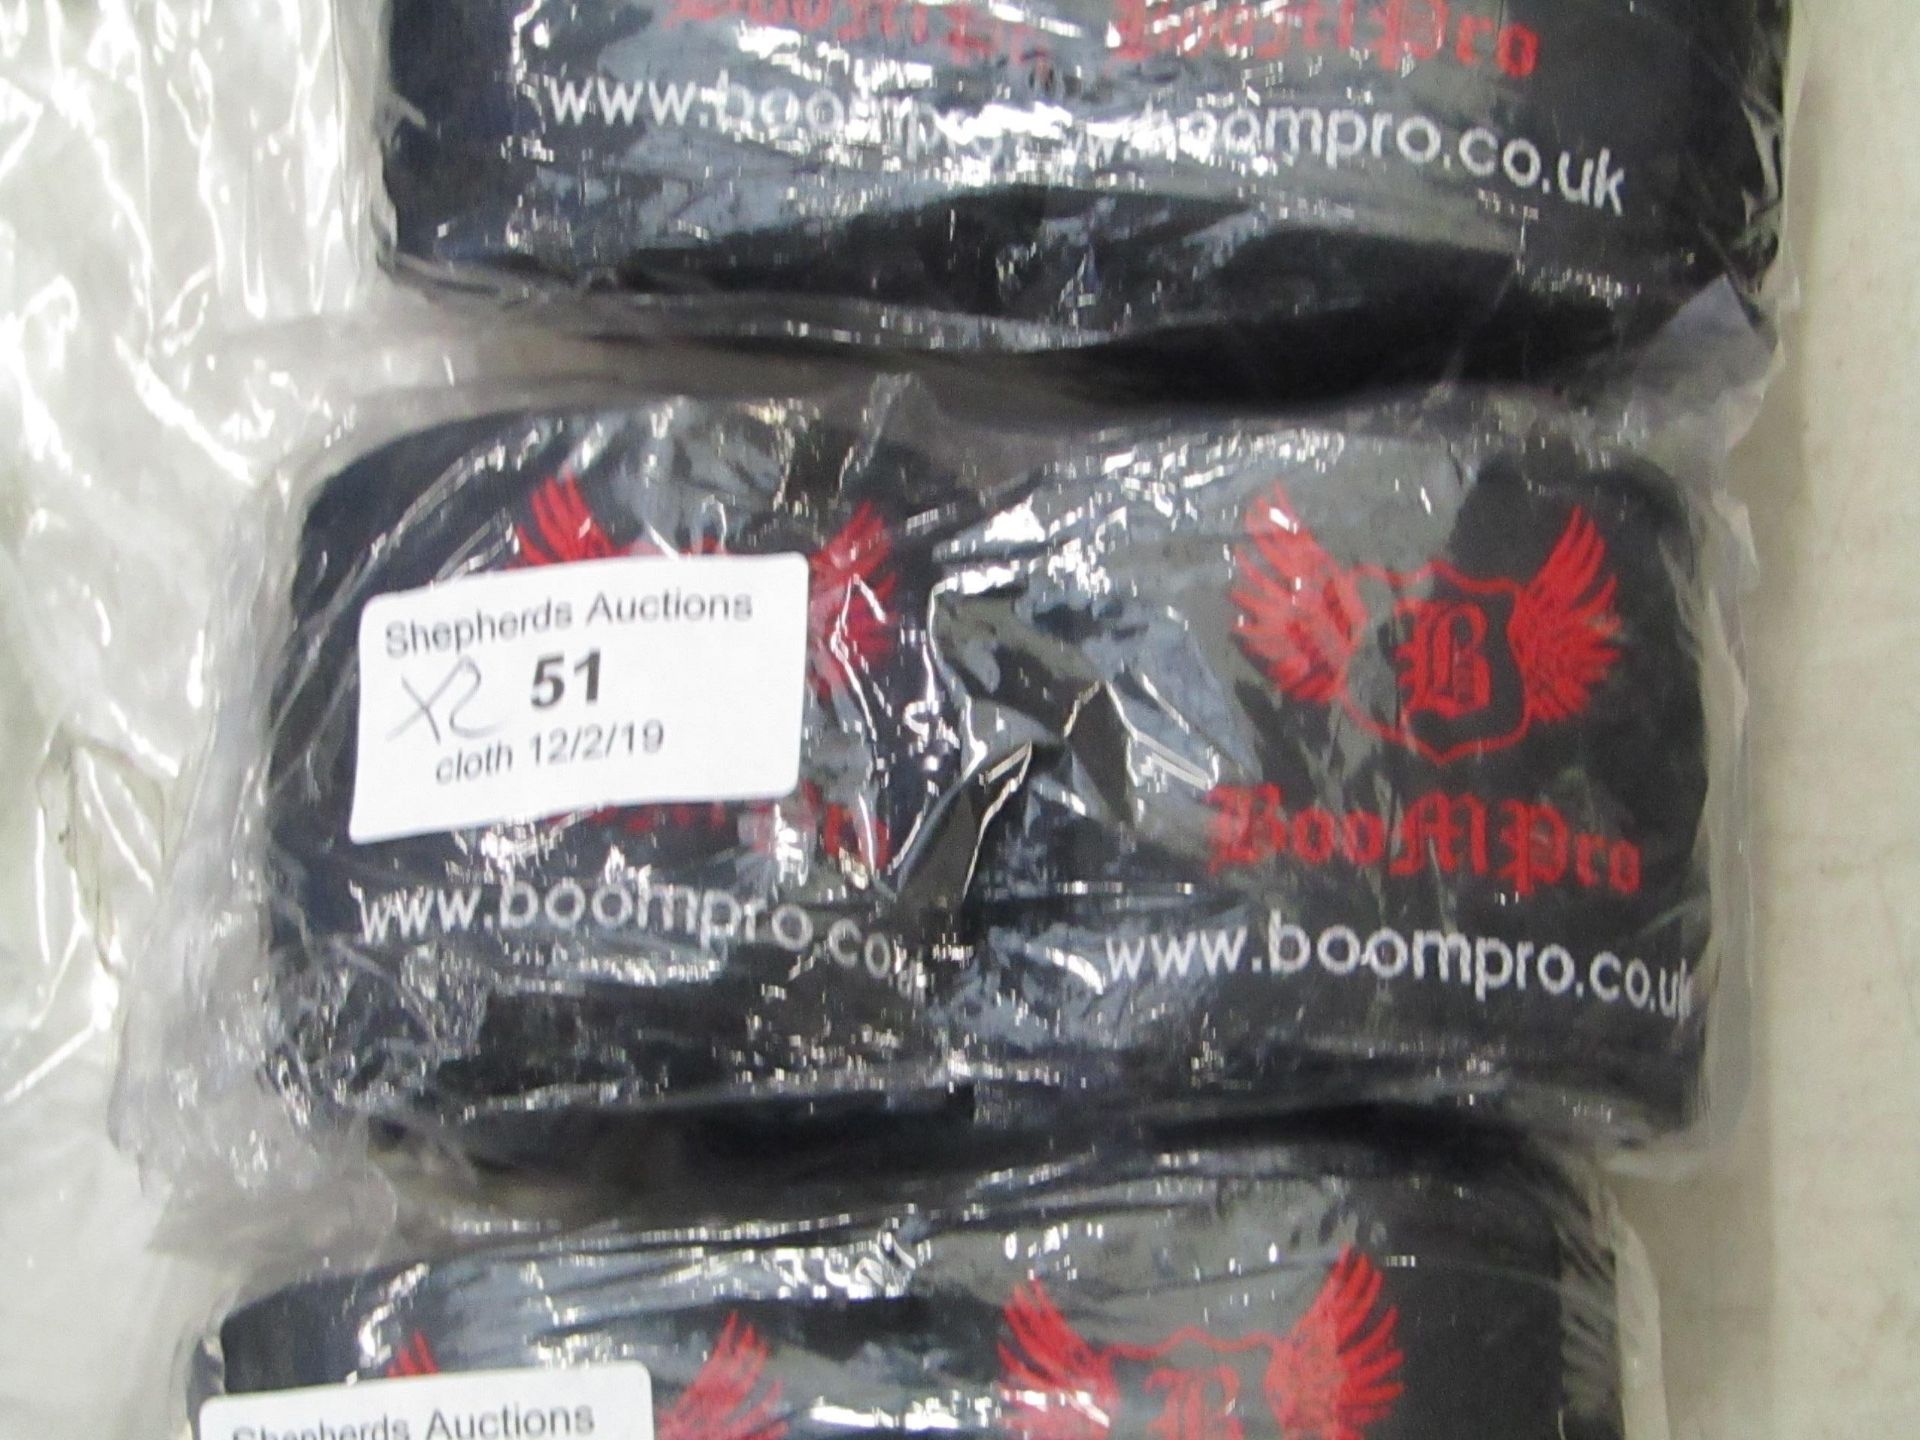 1 x pair of Boom Pro Boxing Hand Wraps MMA new